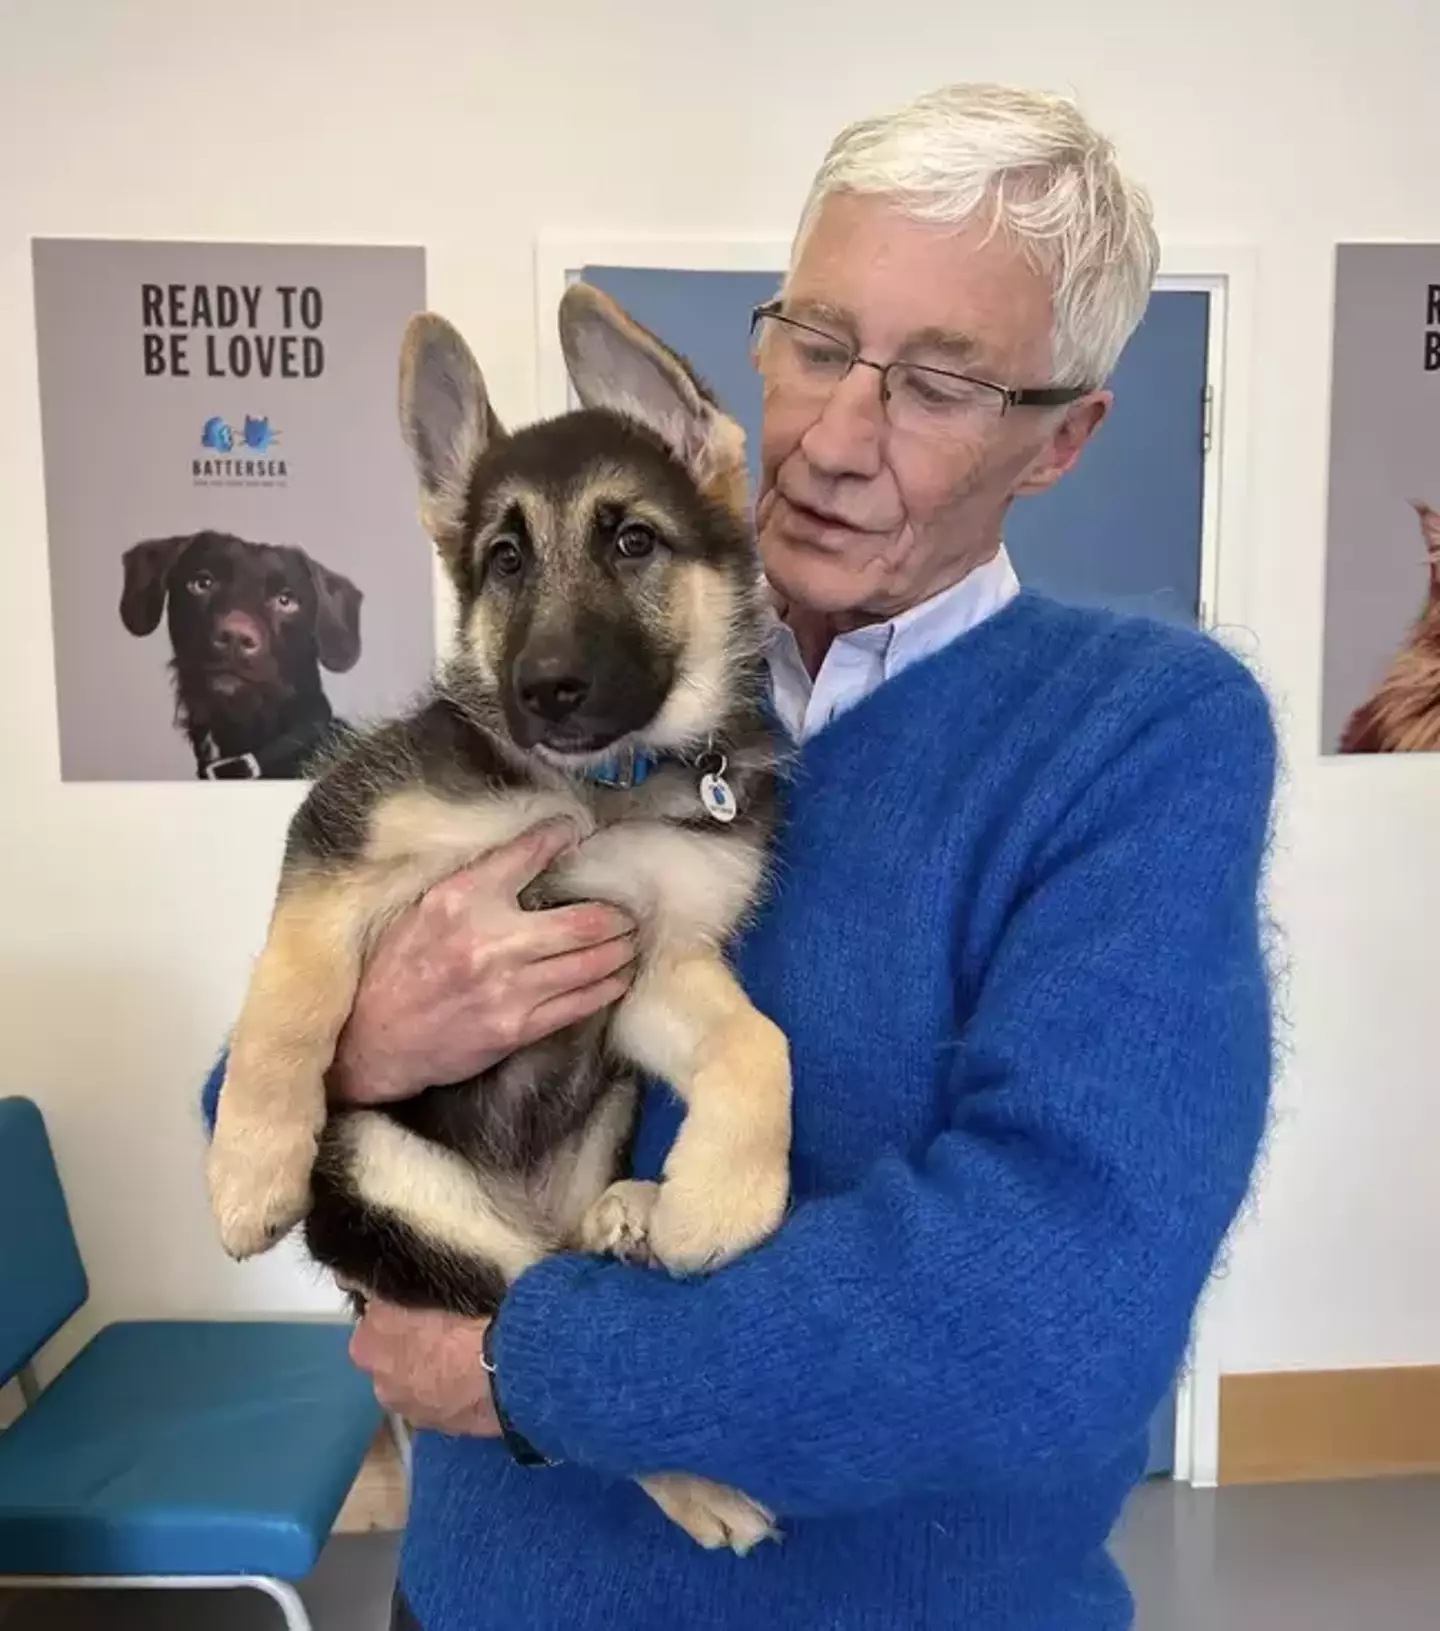 Paul O'Grady was an ambassador for Battersea Dogs and Cats Home.